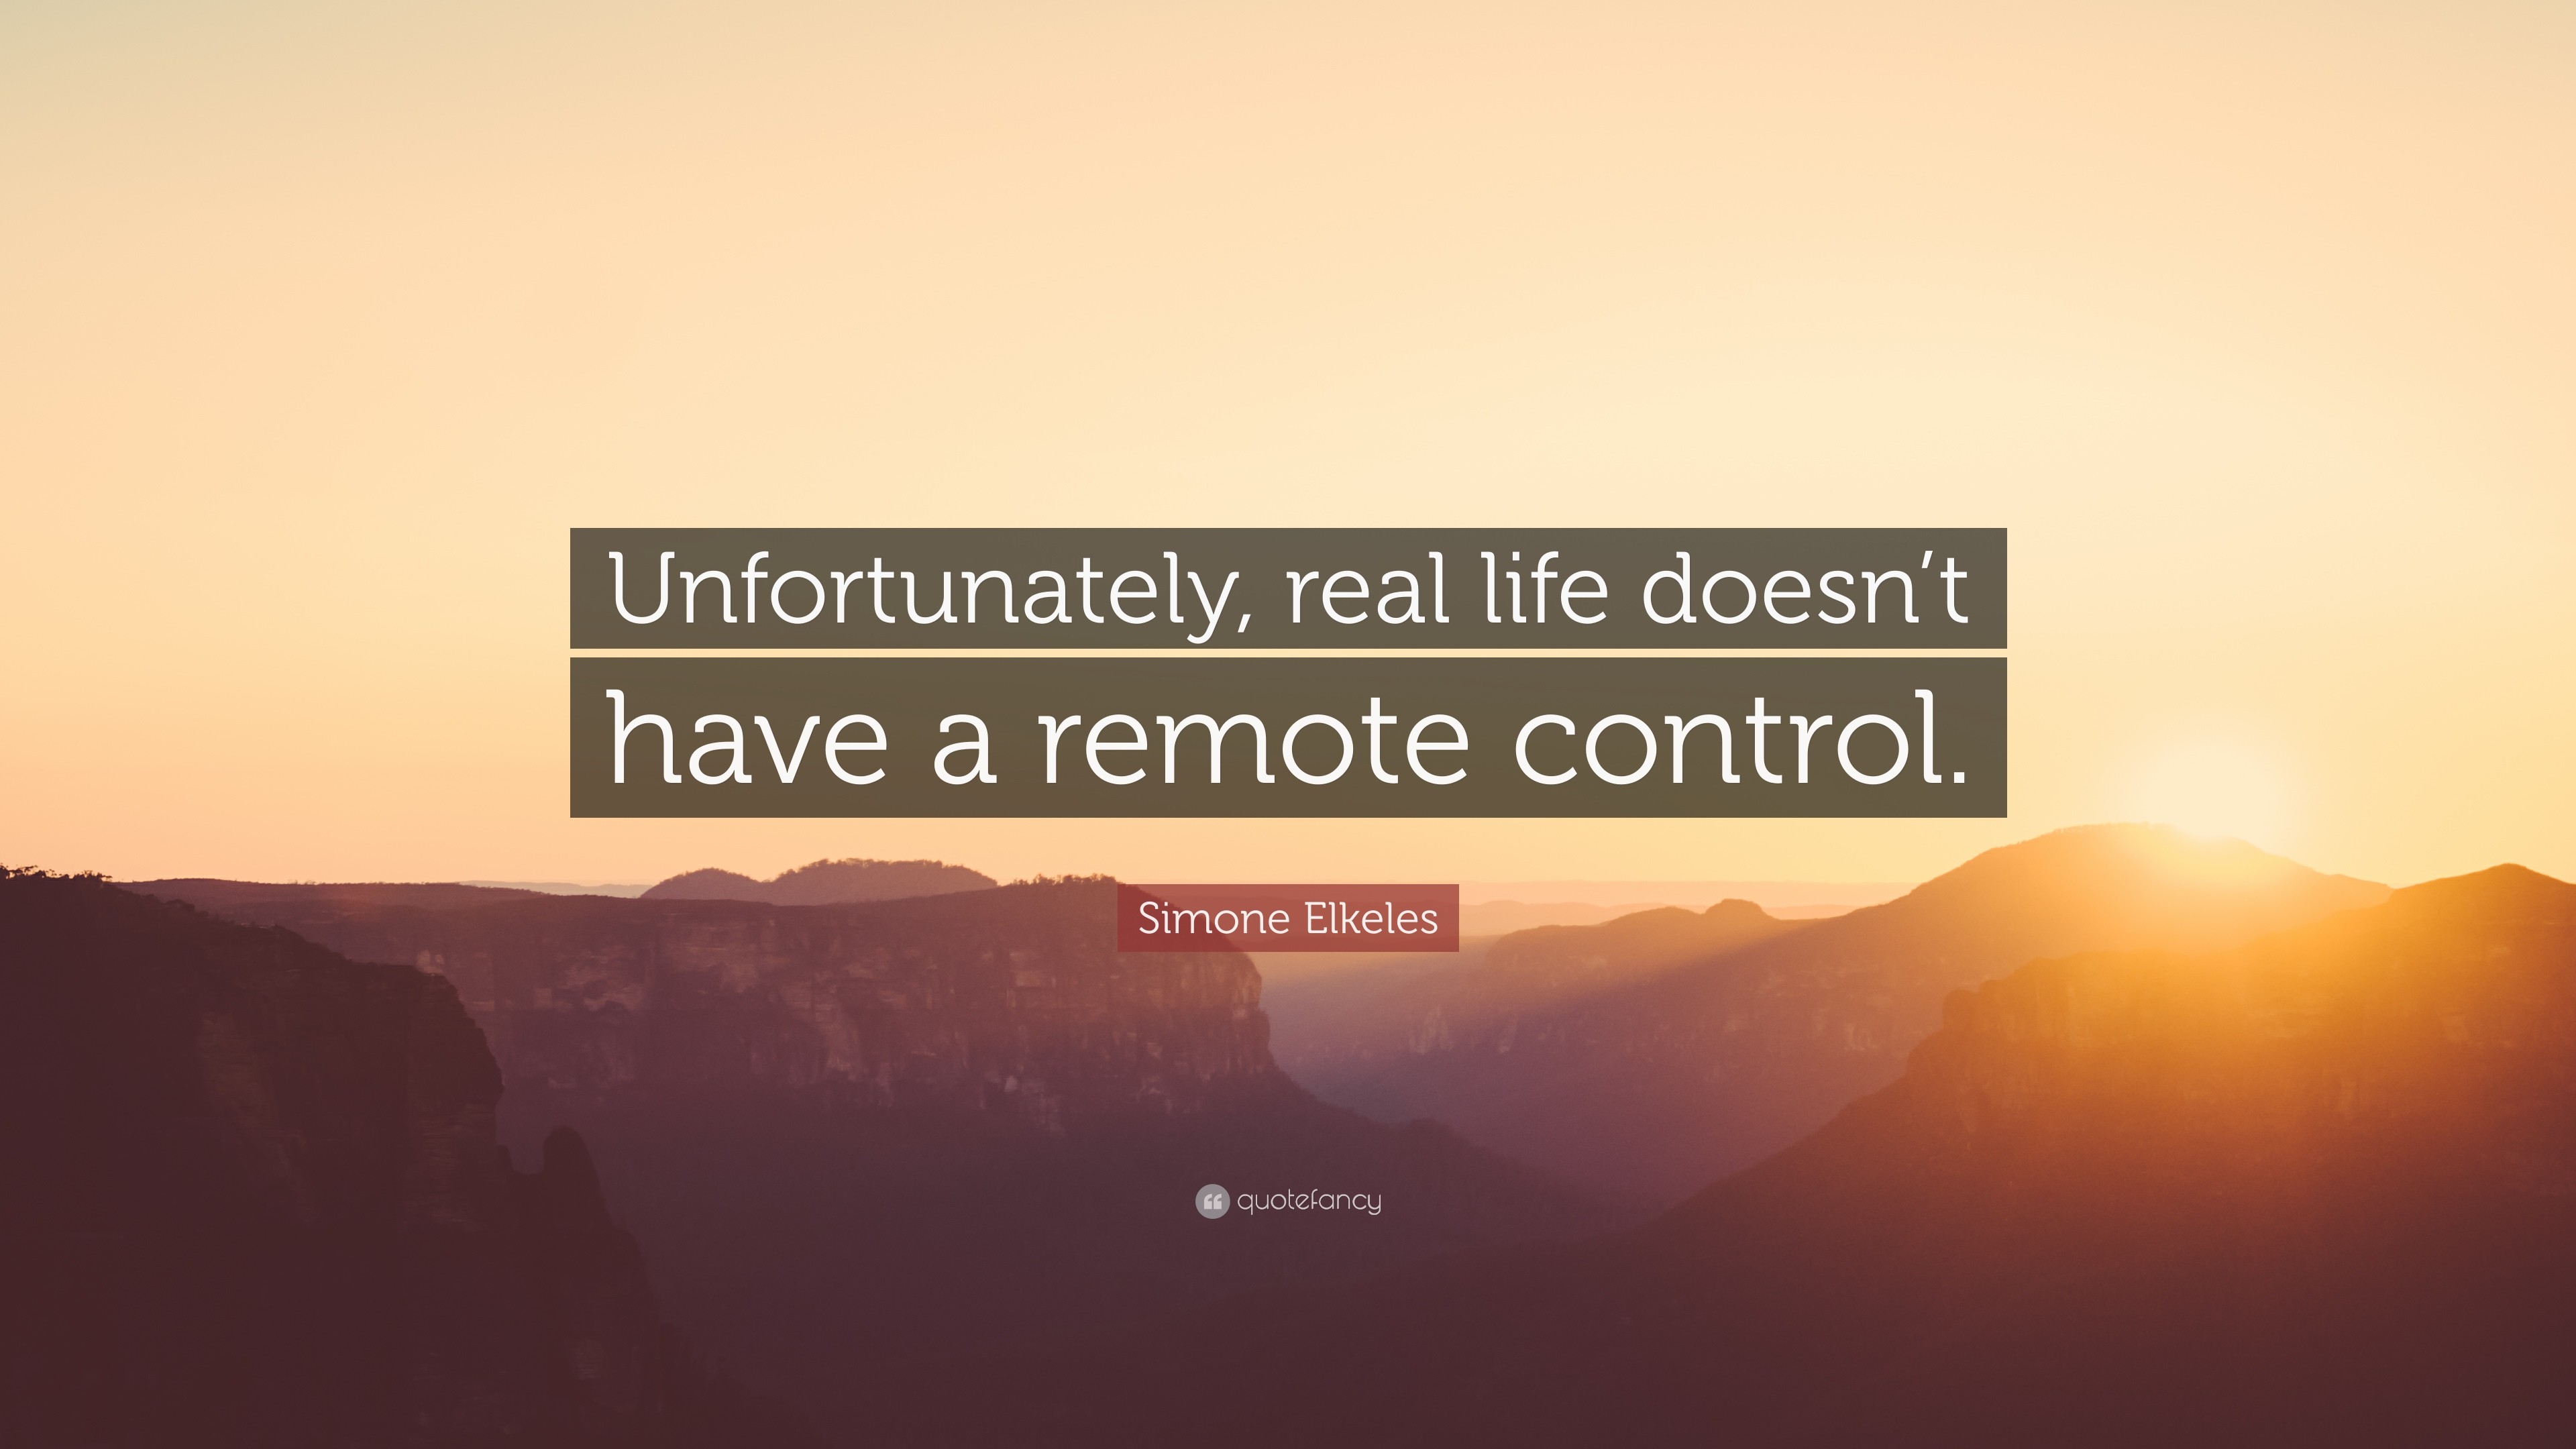 3840x2160 Simone Elkeles Quote: “Unfortunately, real life doesn't have a remote  control